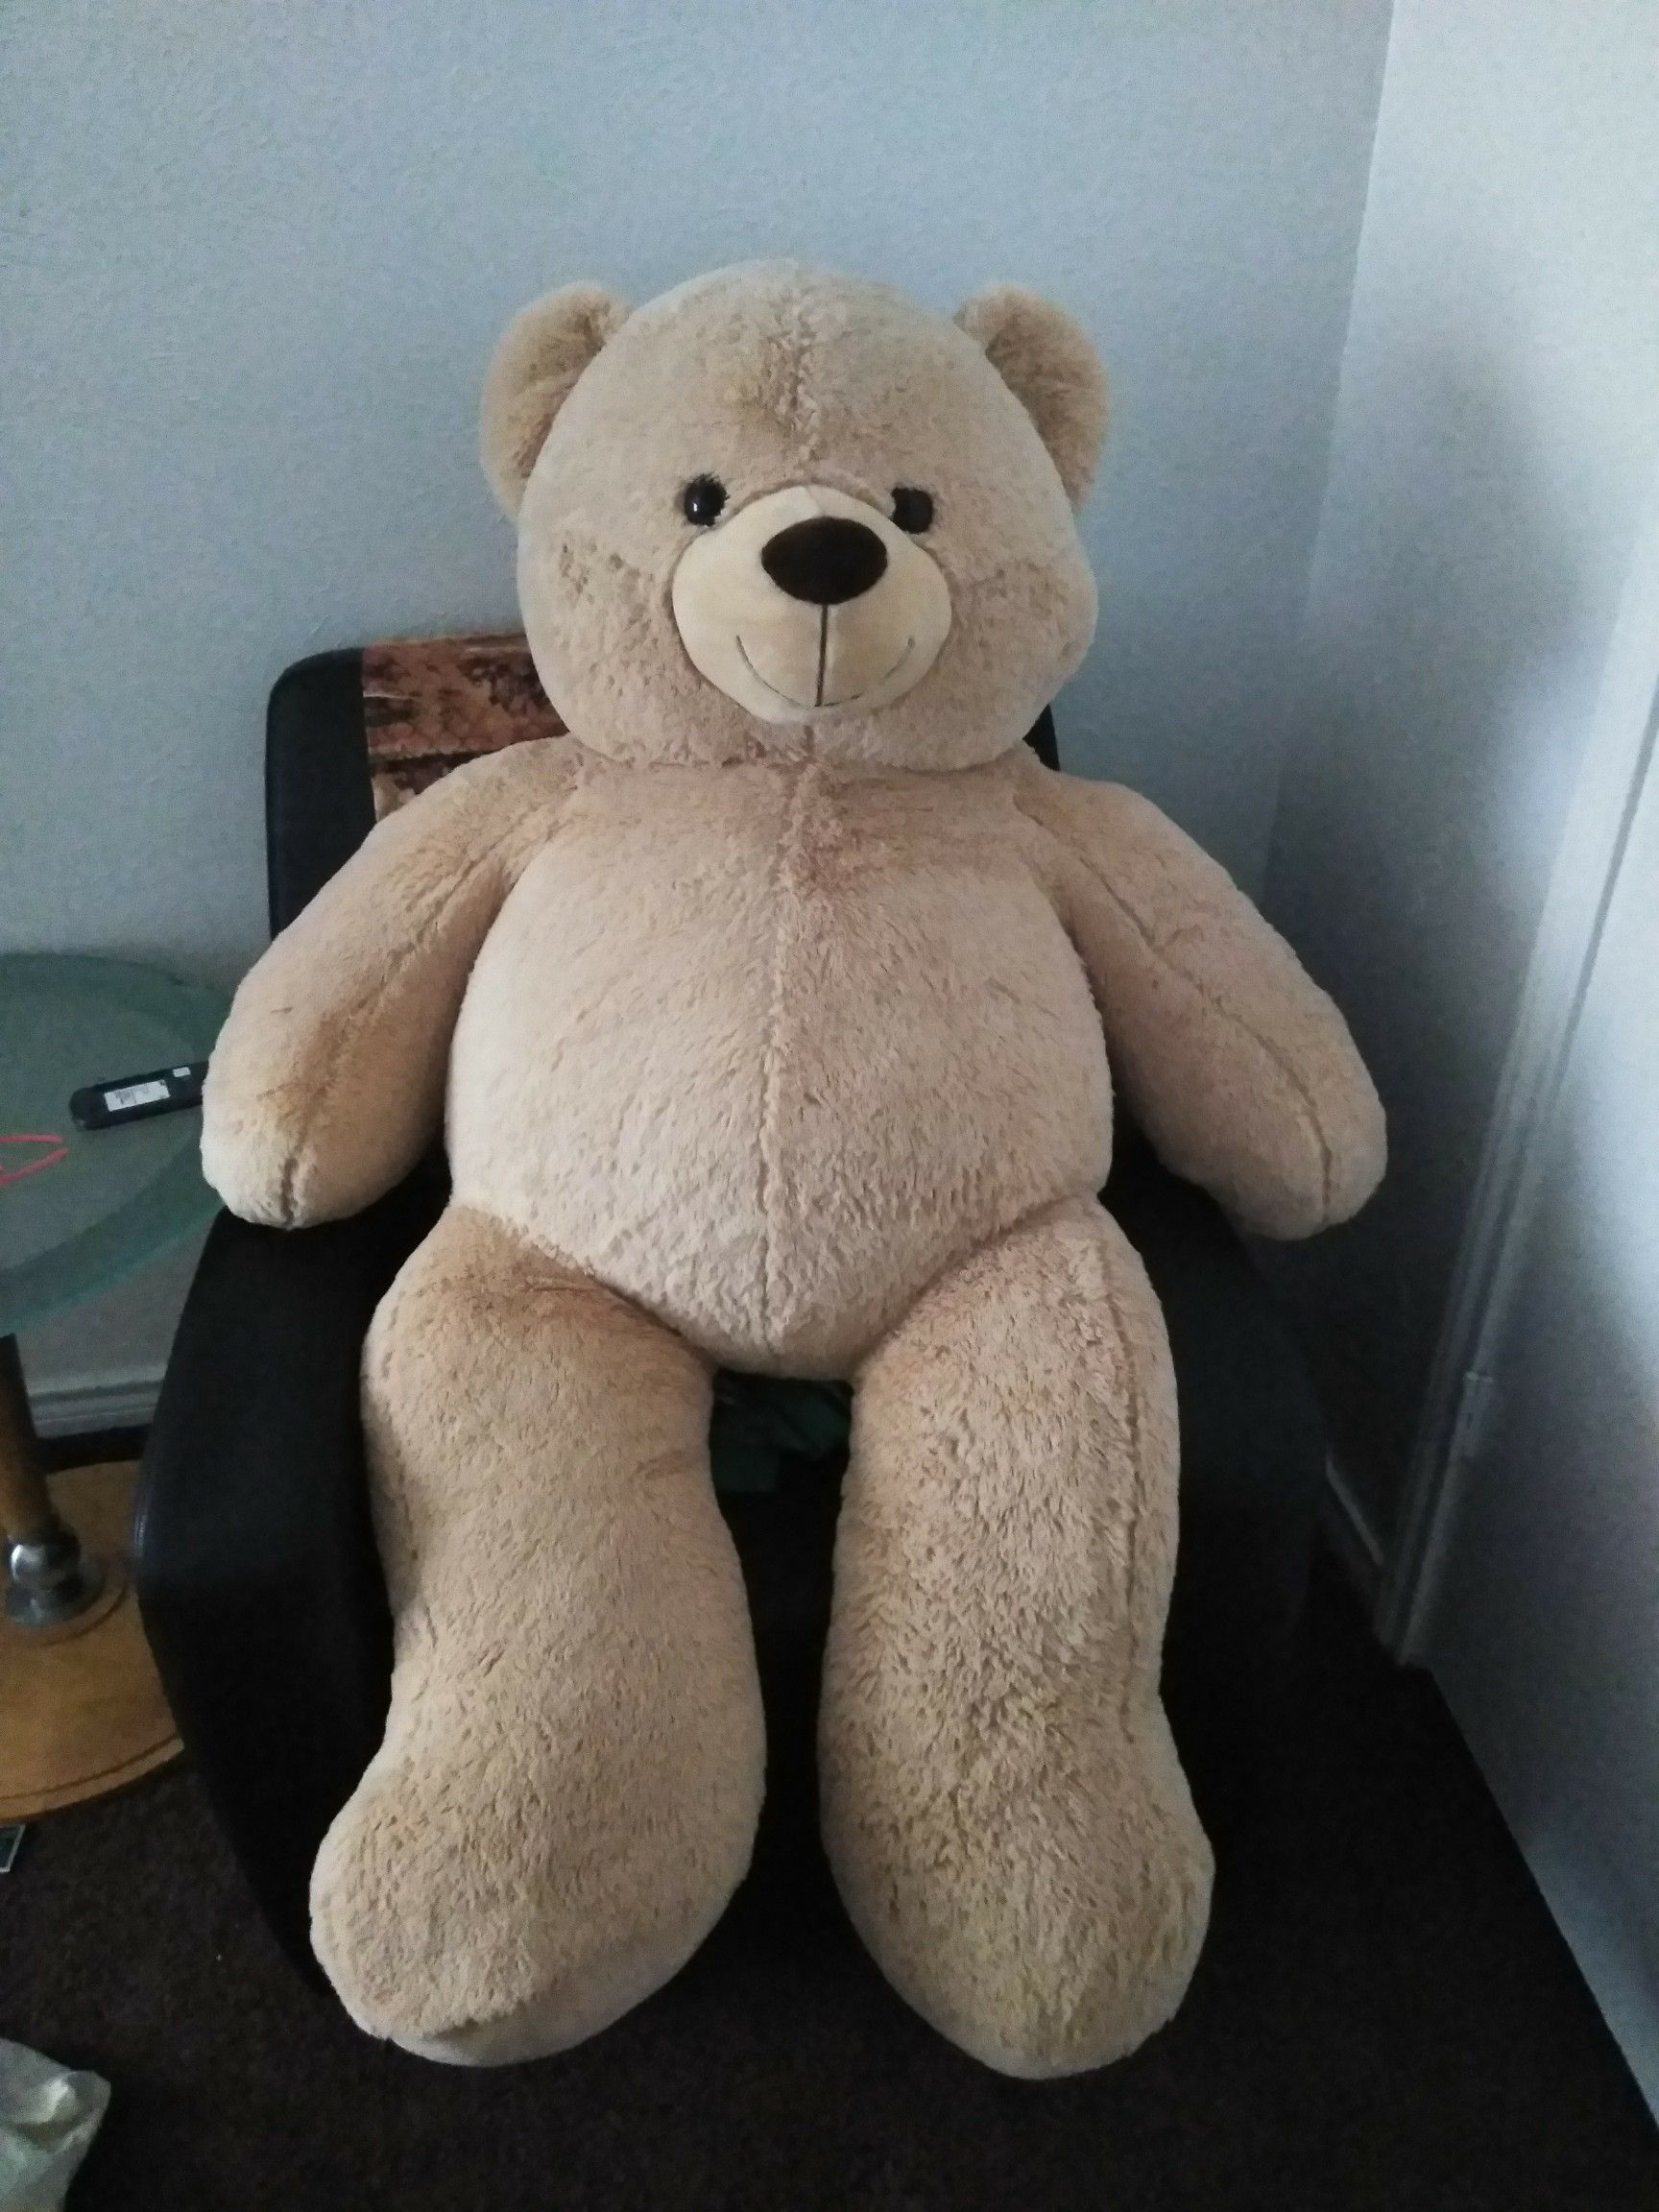 Giant teddy bear bought recently